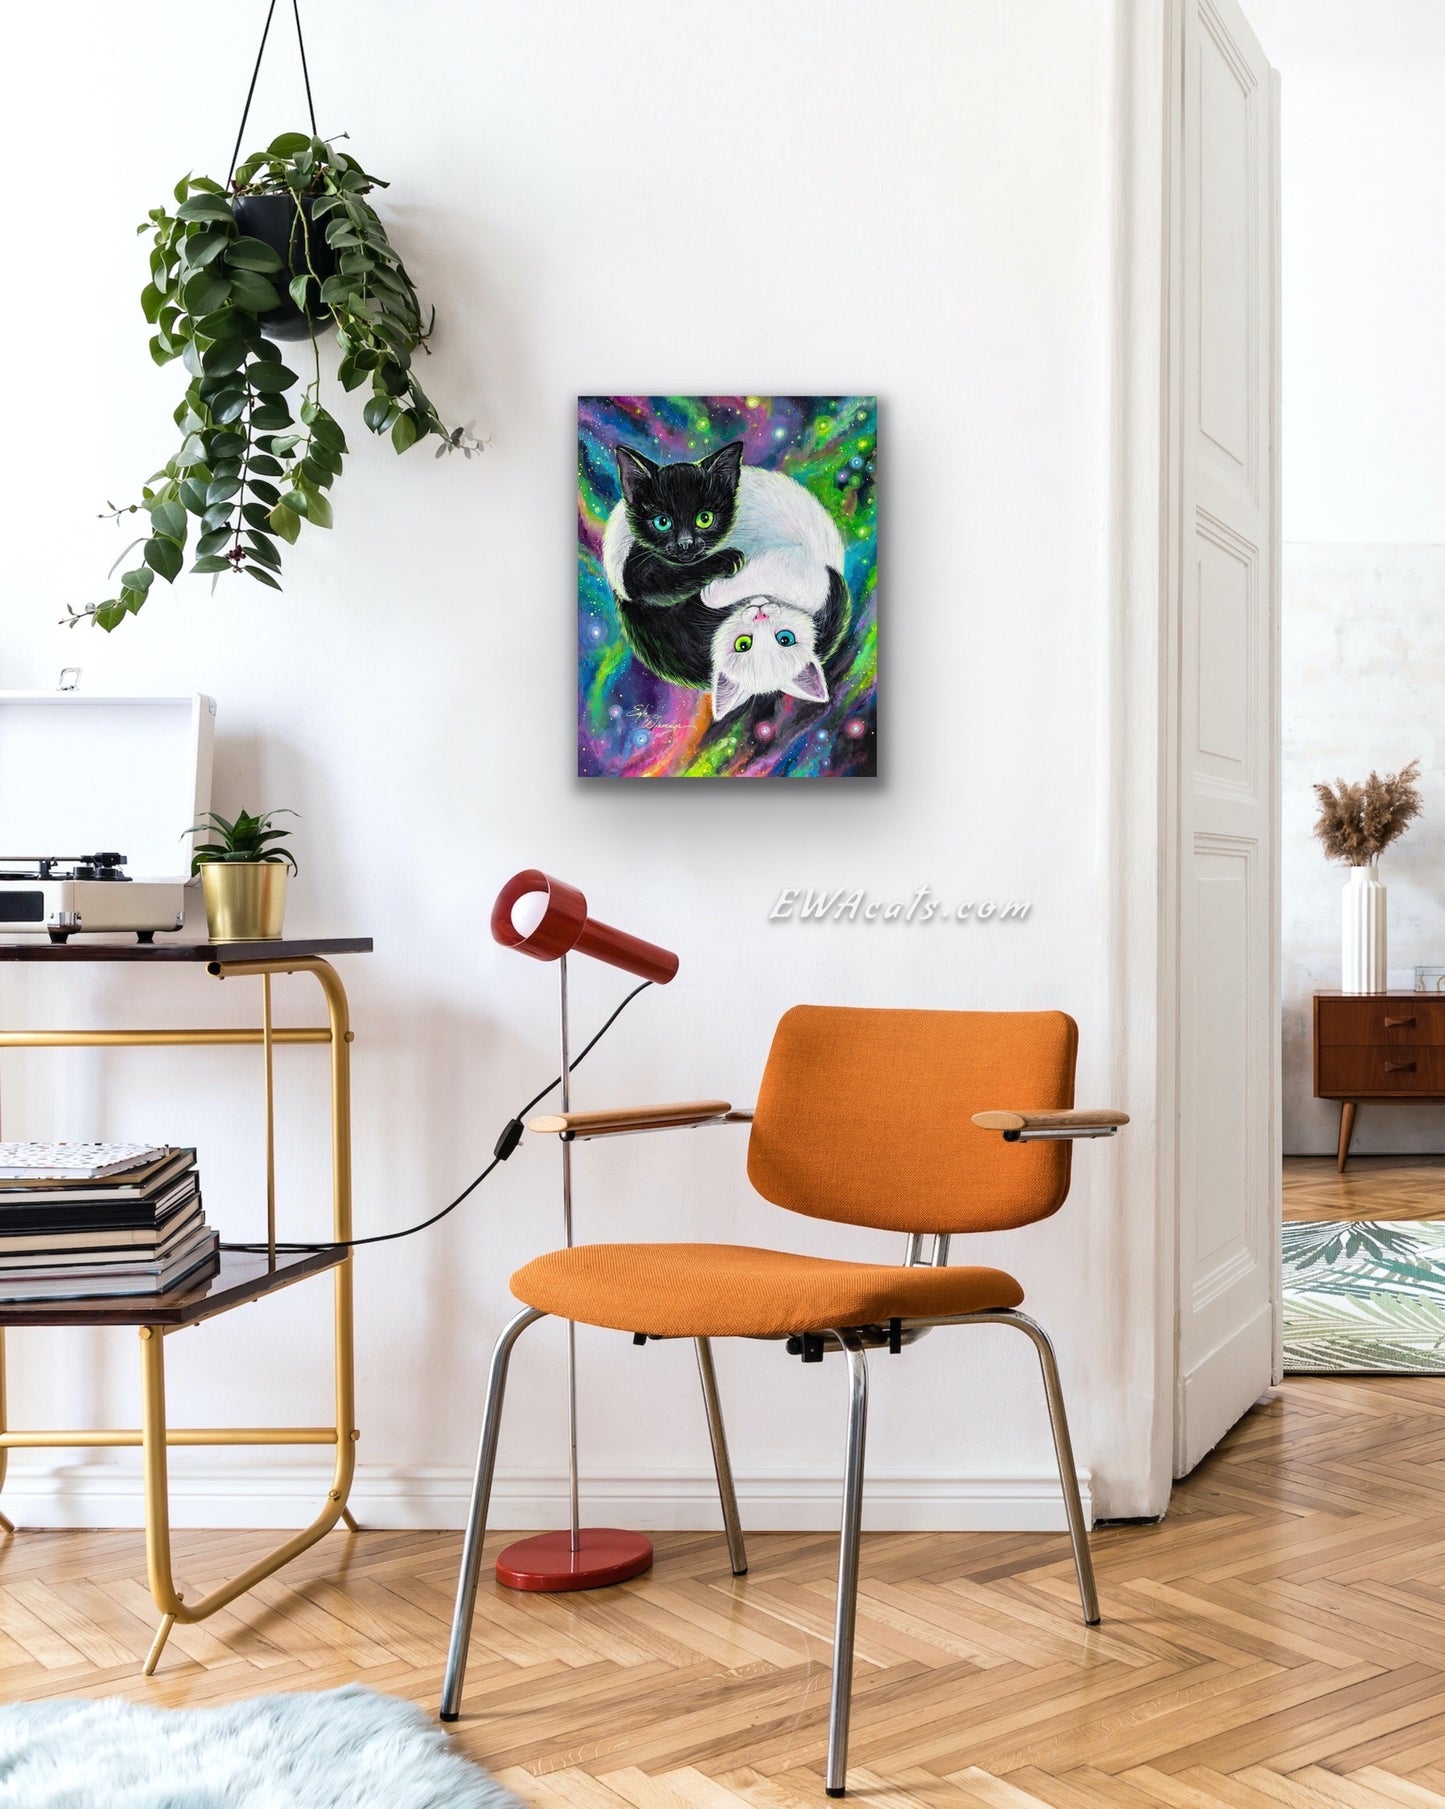 CANVAS "Purrfect Harmony" Open & Limited Edition